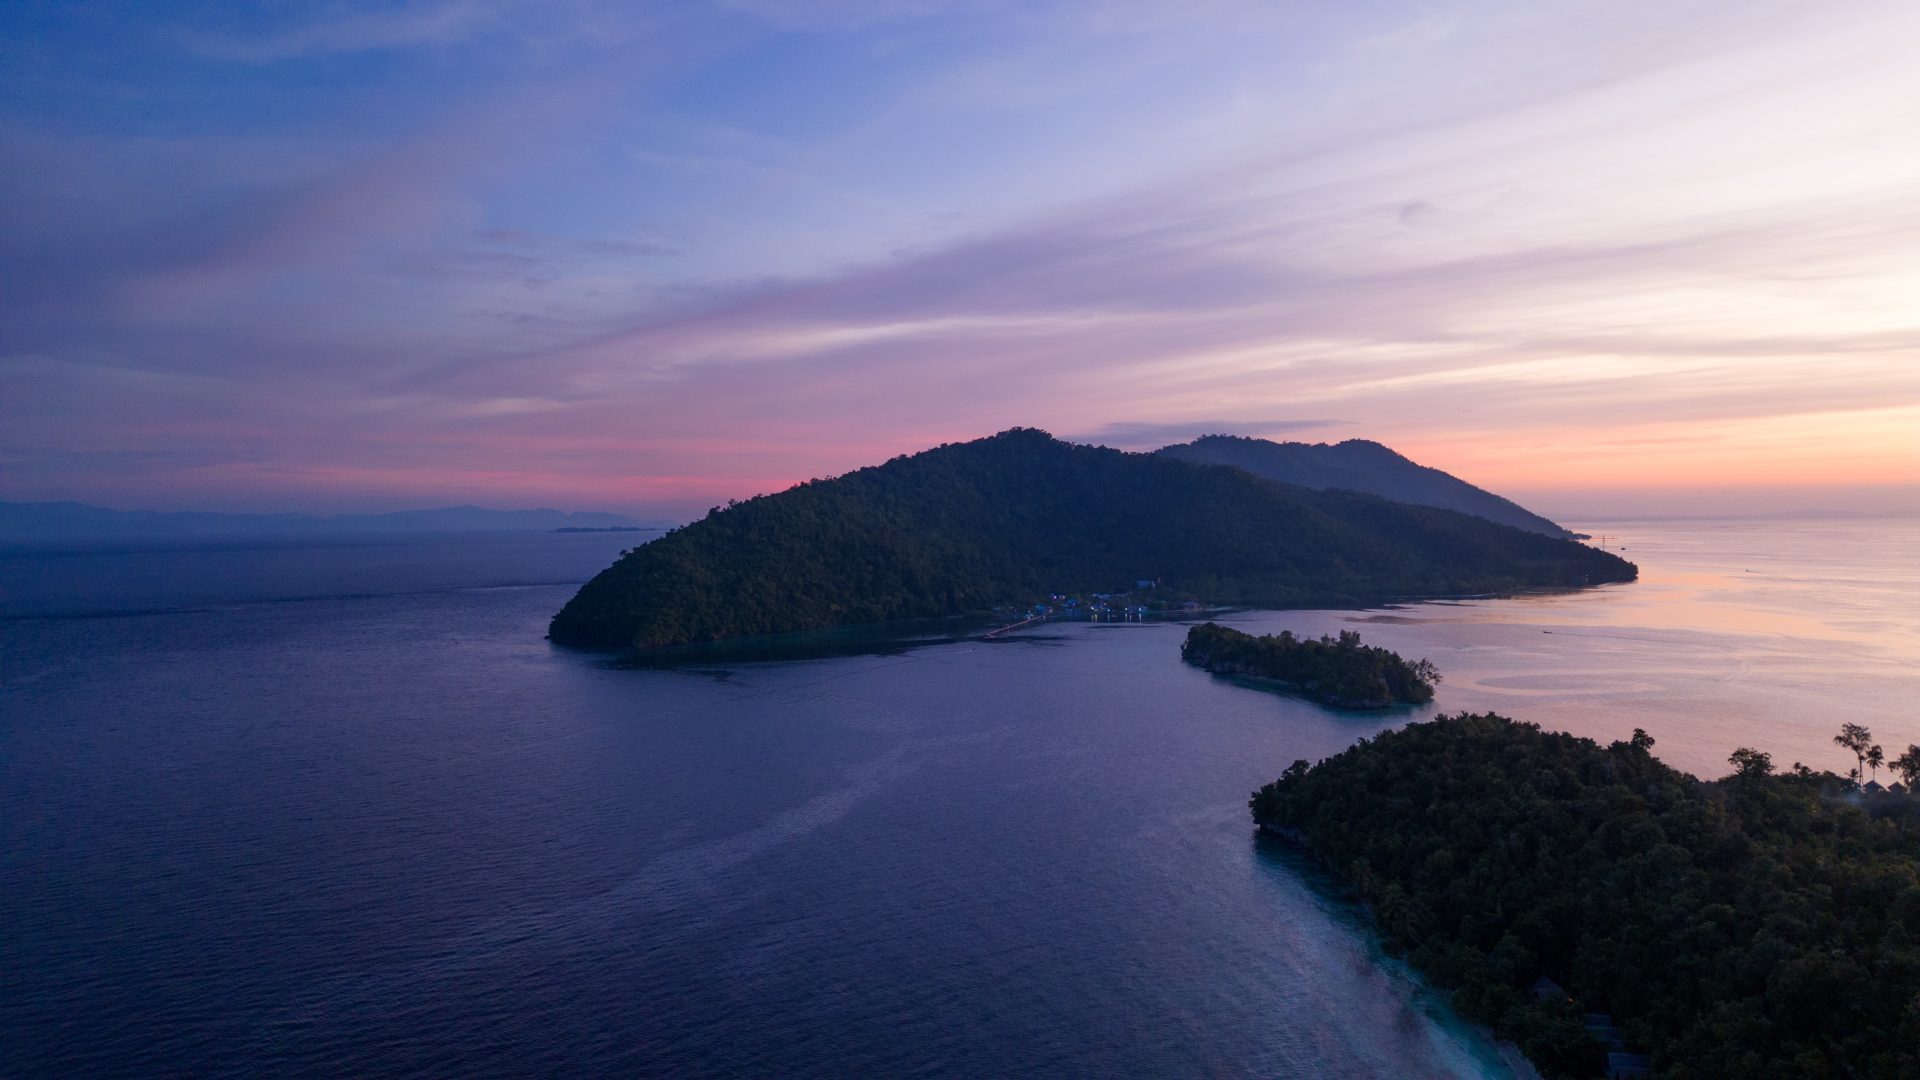 Drone shot of a sunset over several islands in Raja Ampat, Indonesia.